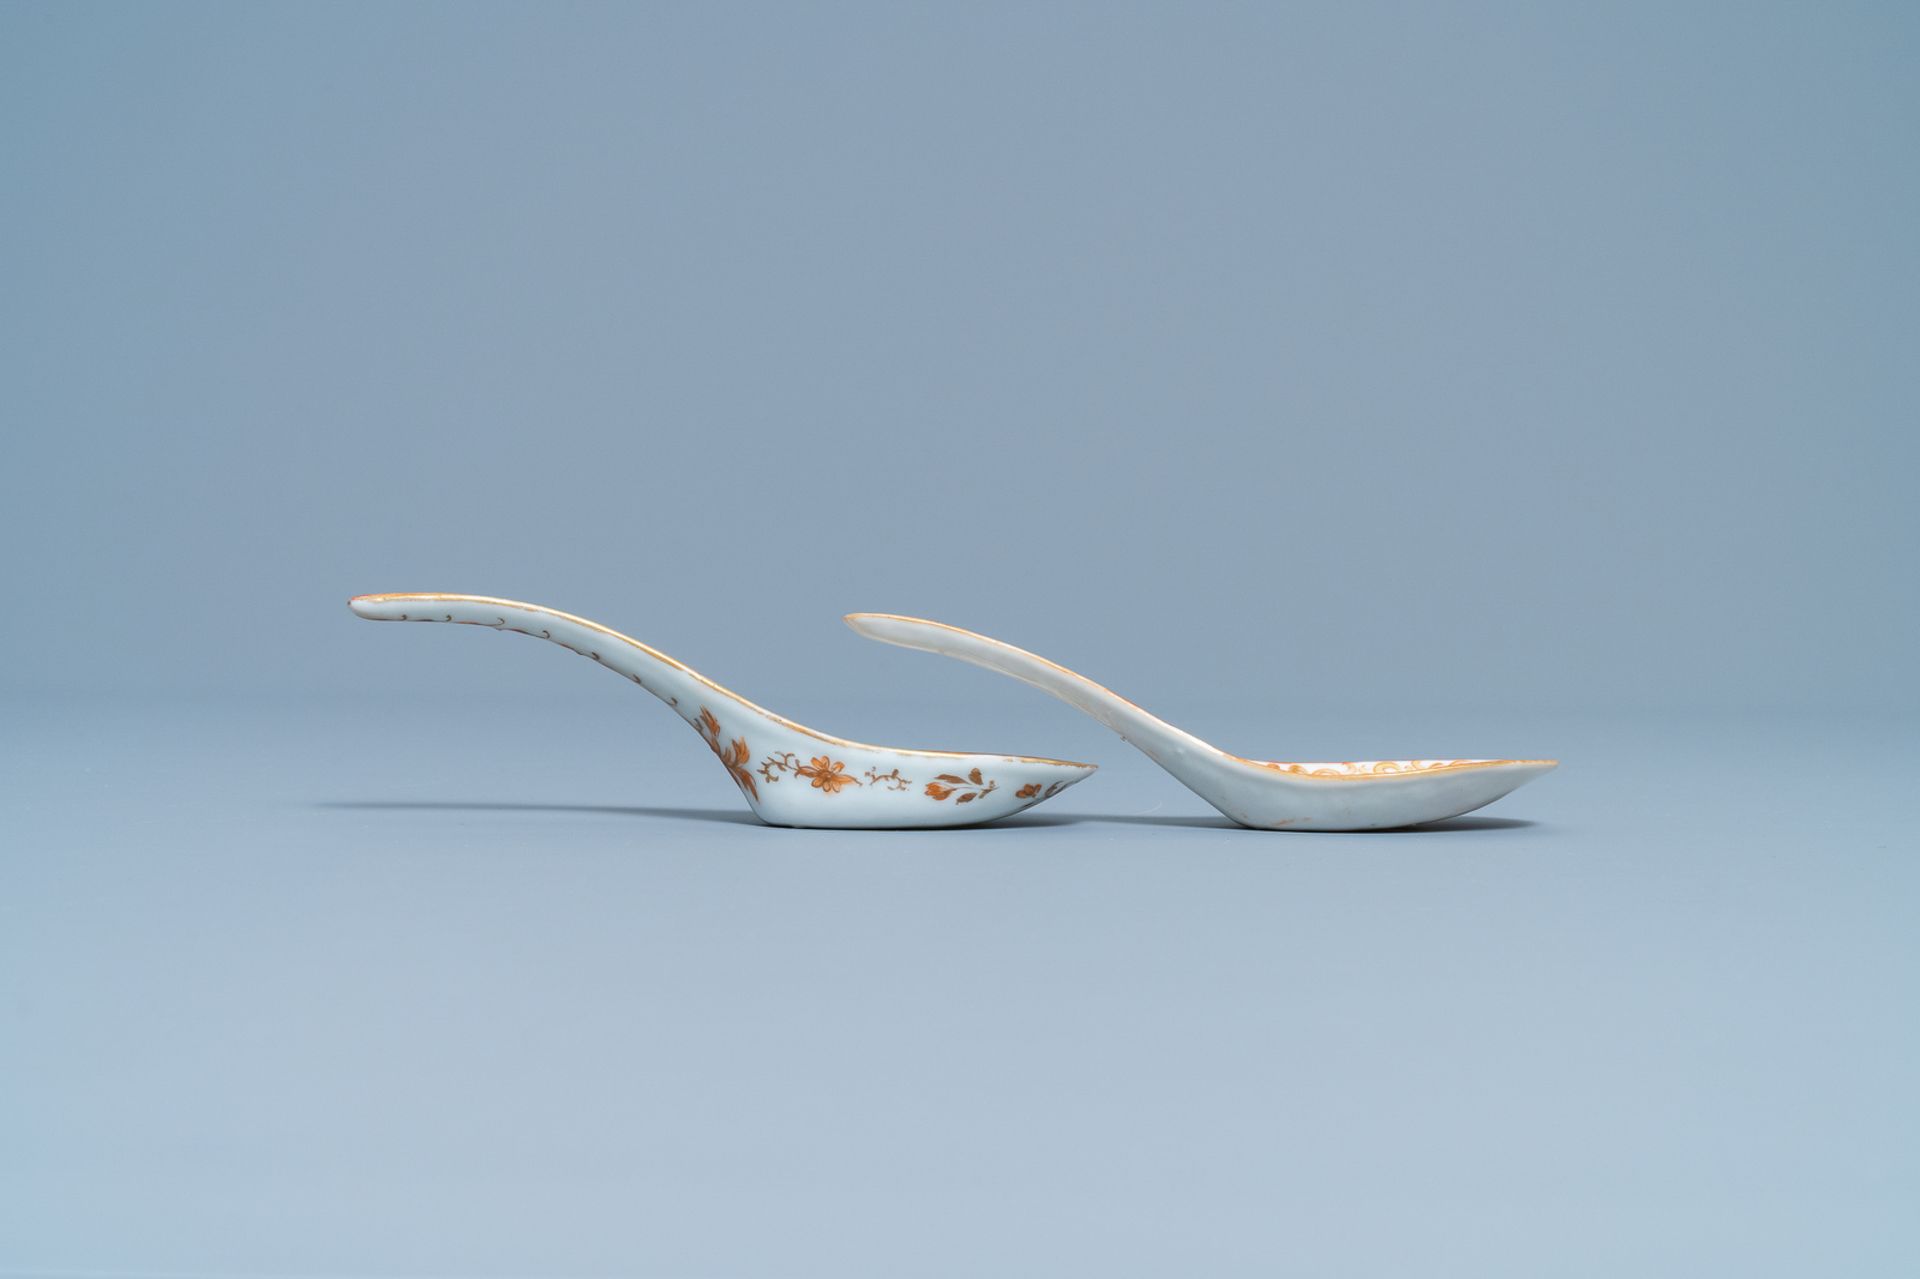 Two Chinese Thai market Lai Nam Thong spoons, 19th C. - Image 5 of 5